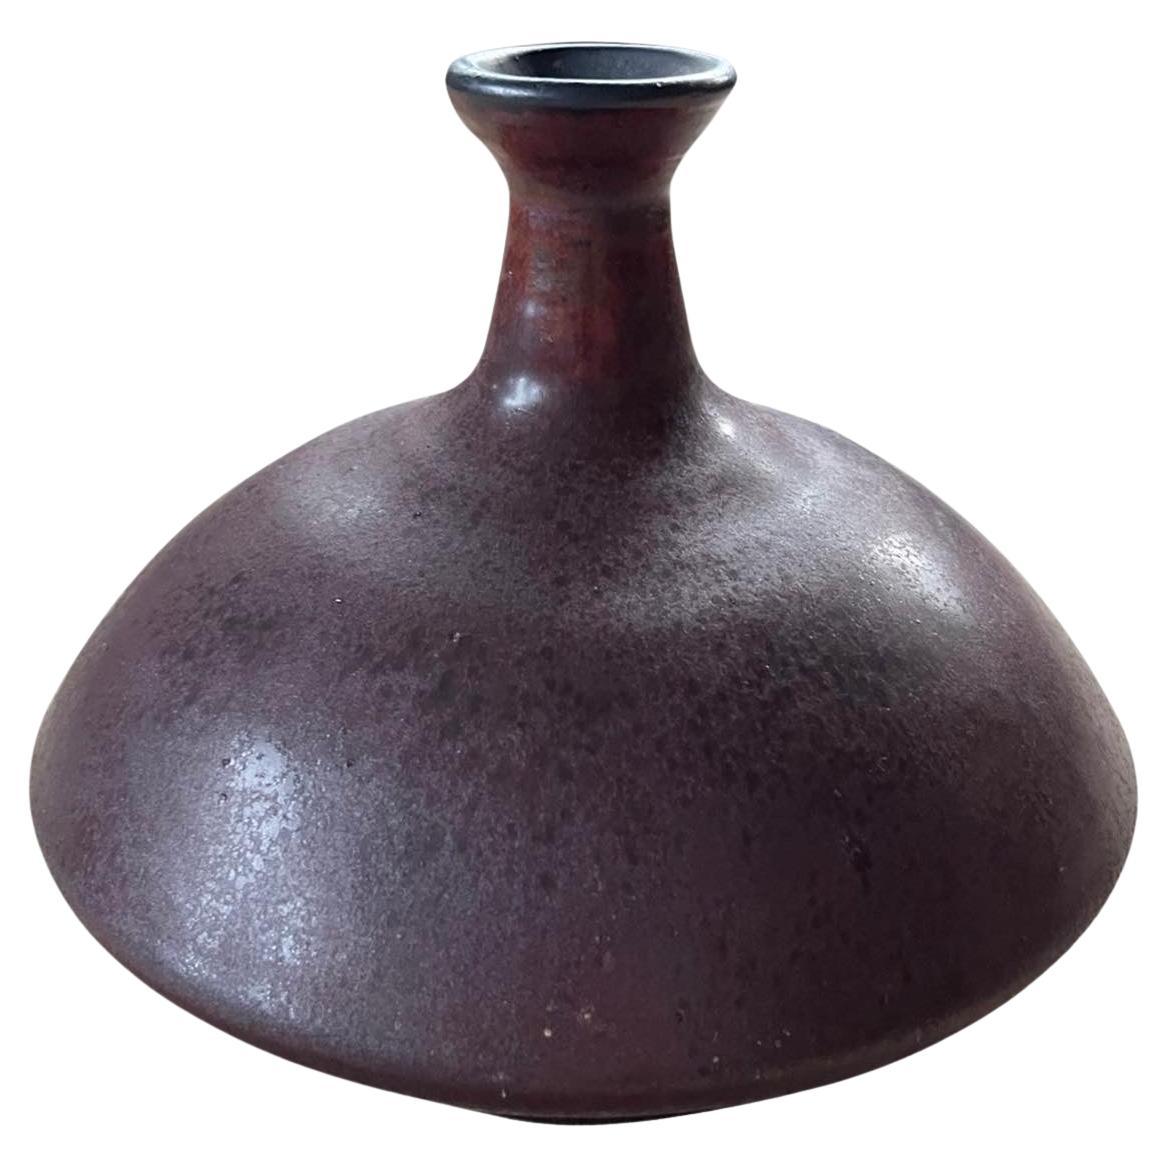 A beautiful hand thrown vase/vessel by renowned ceramic artist Stephen Polchert (1920-2008). Polchert attended Cranbrook Academy in the 1950s and was an assistant and friend of Maija Grotell.